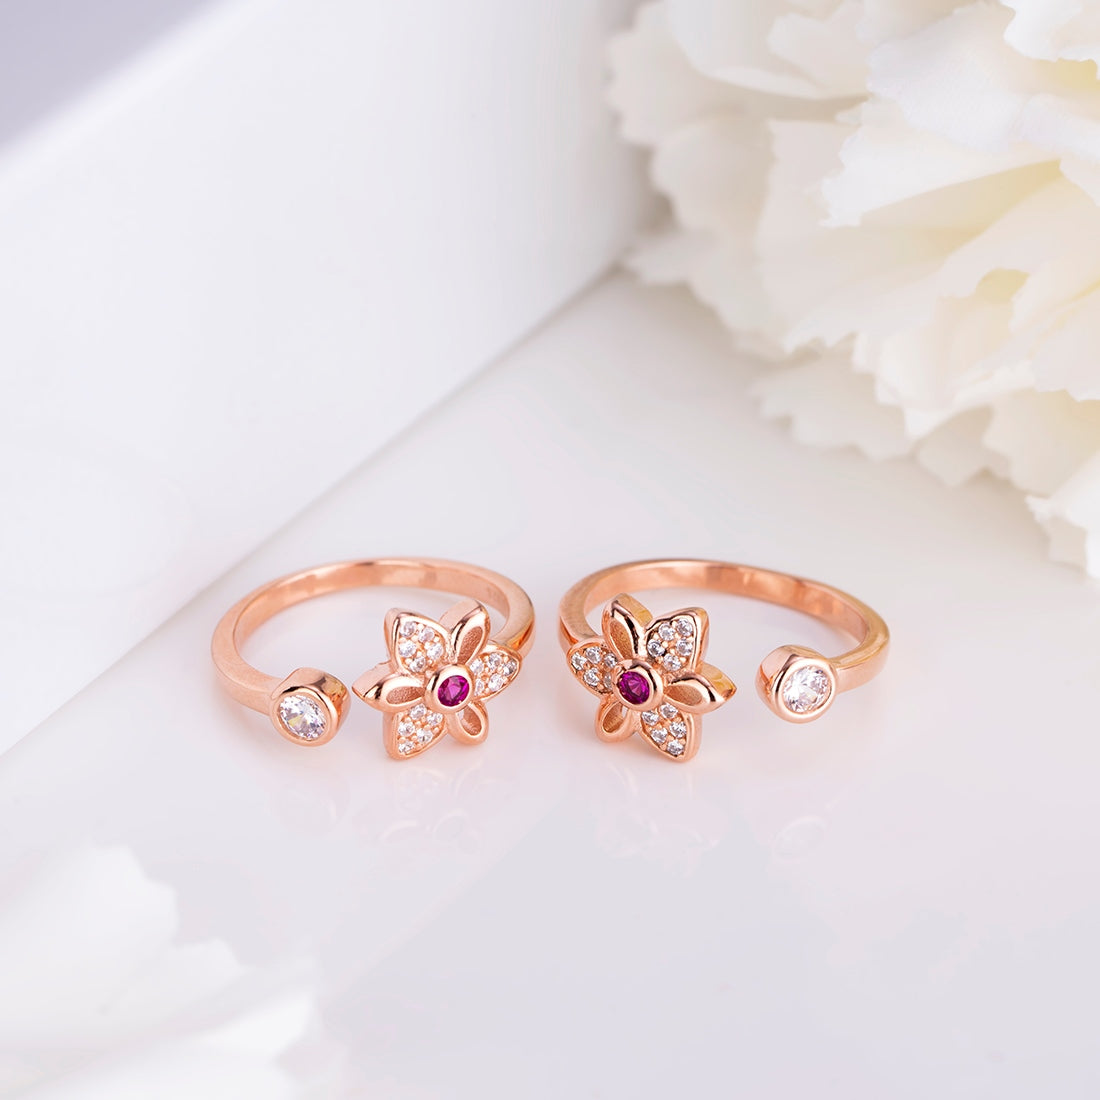 Blooming Petals Rose Gold-Plated 925 Sterling Silver Toe Ring with Cubic Zirconia